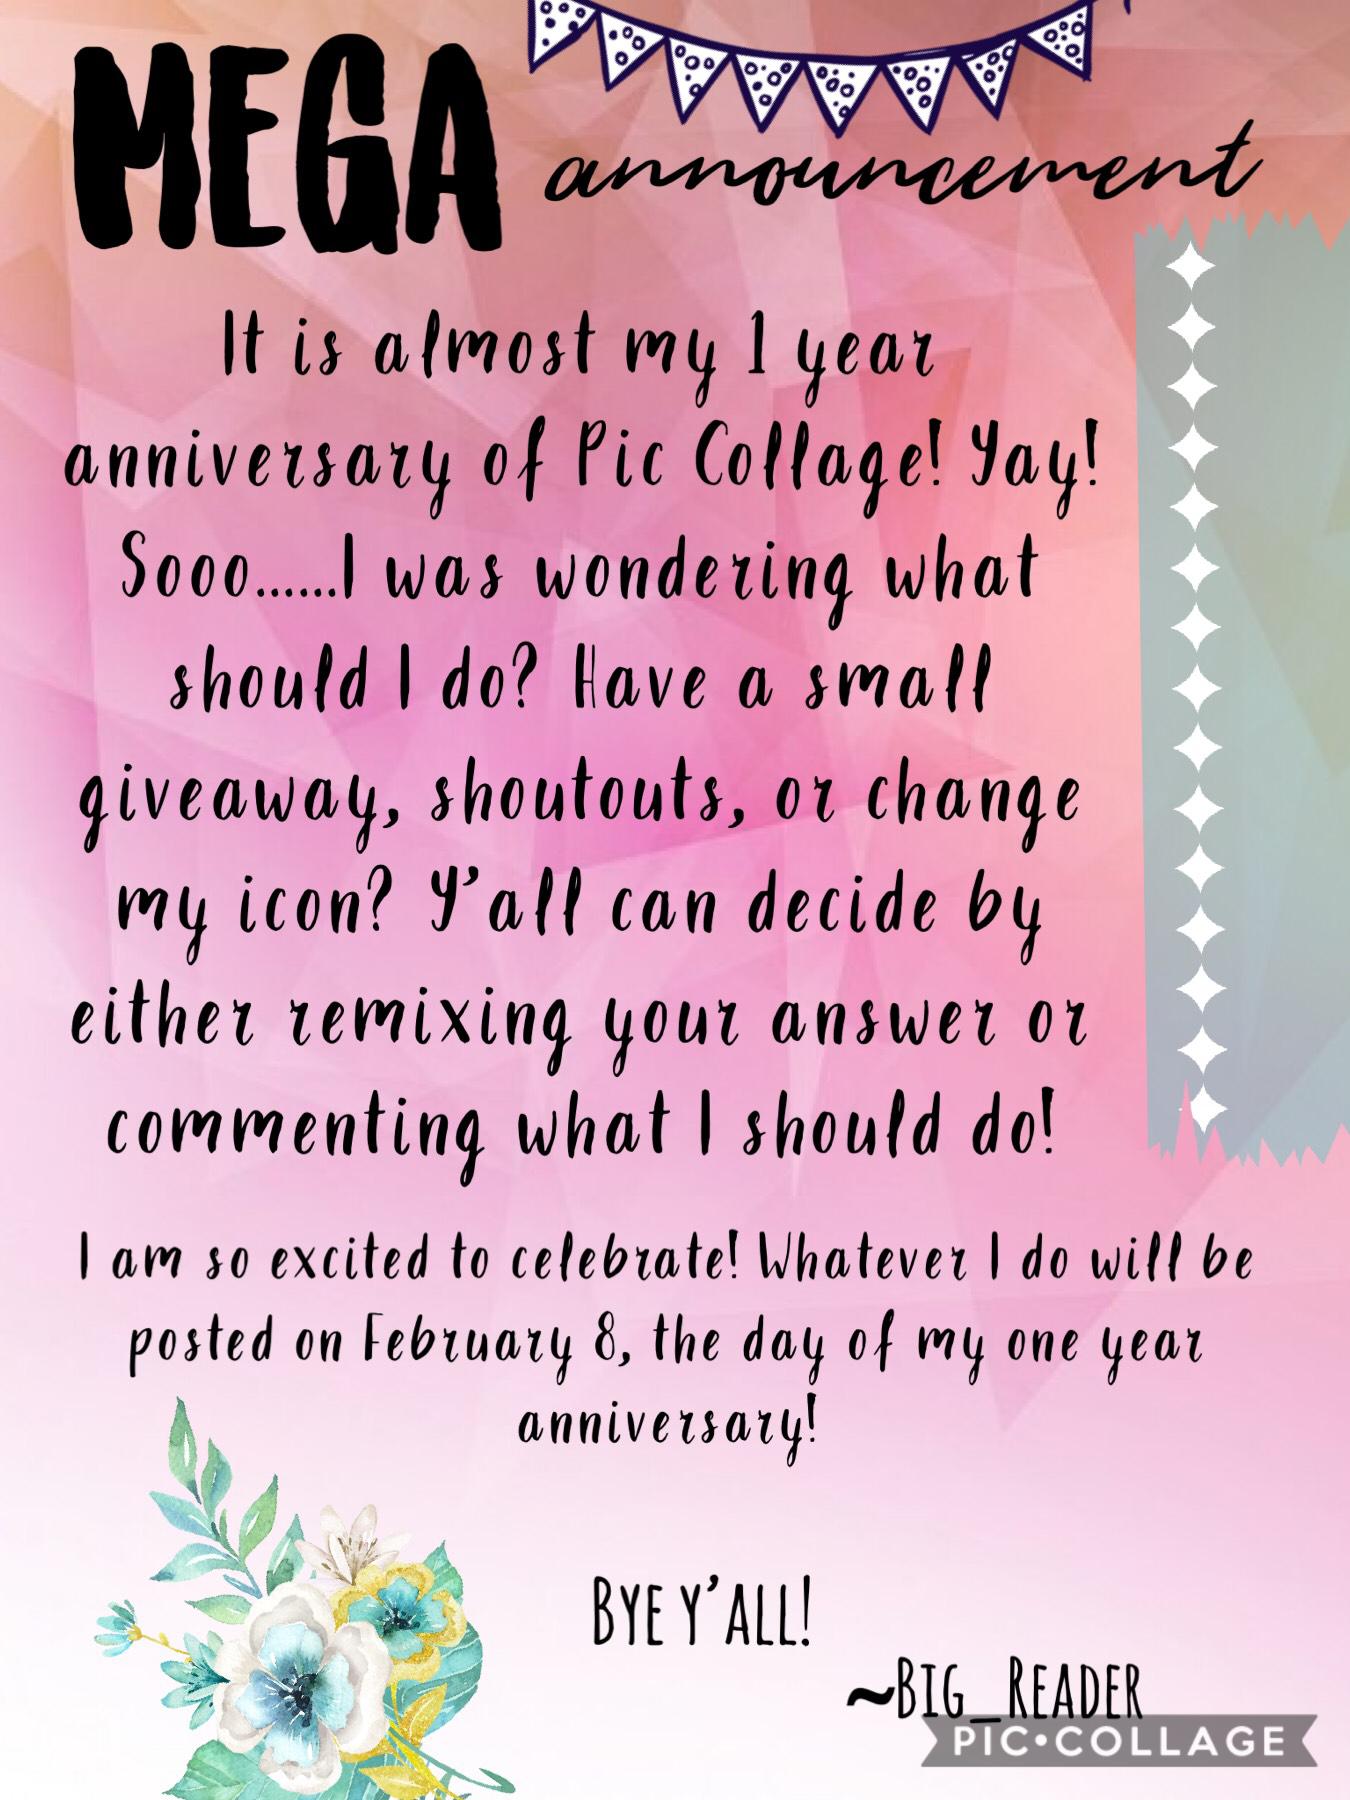 I am celebrating by official 1 year anniversary of being apart of Pic Collage on Friday, February 8! 🥳🥳🥳